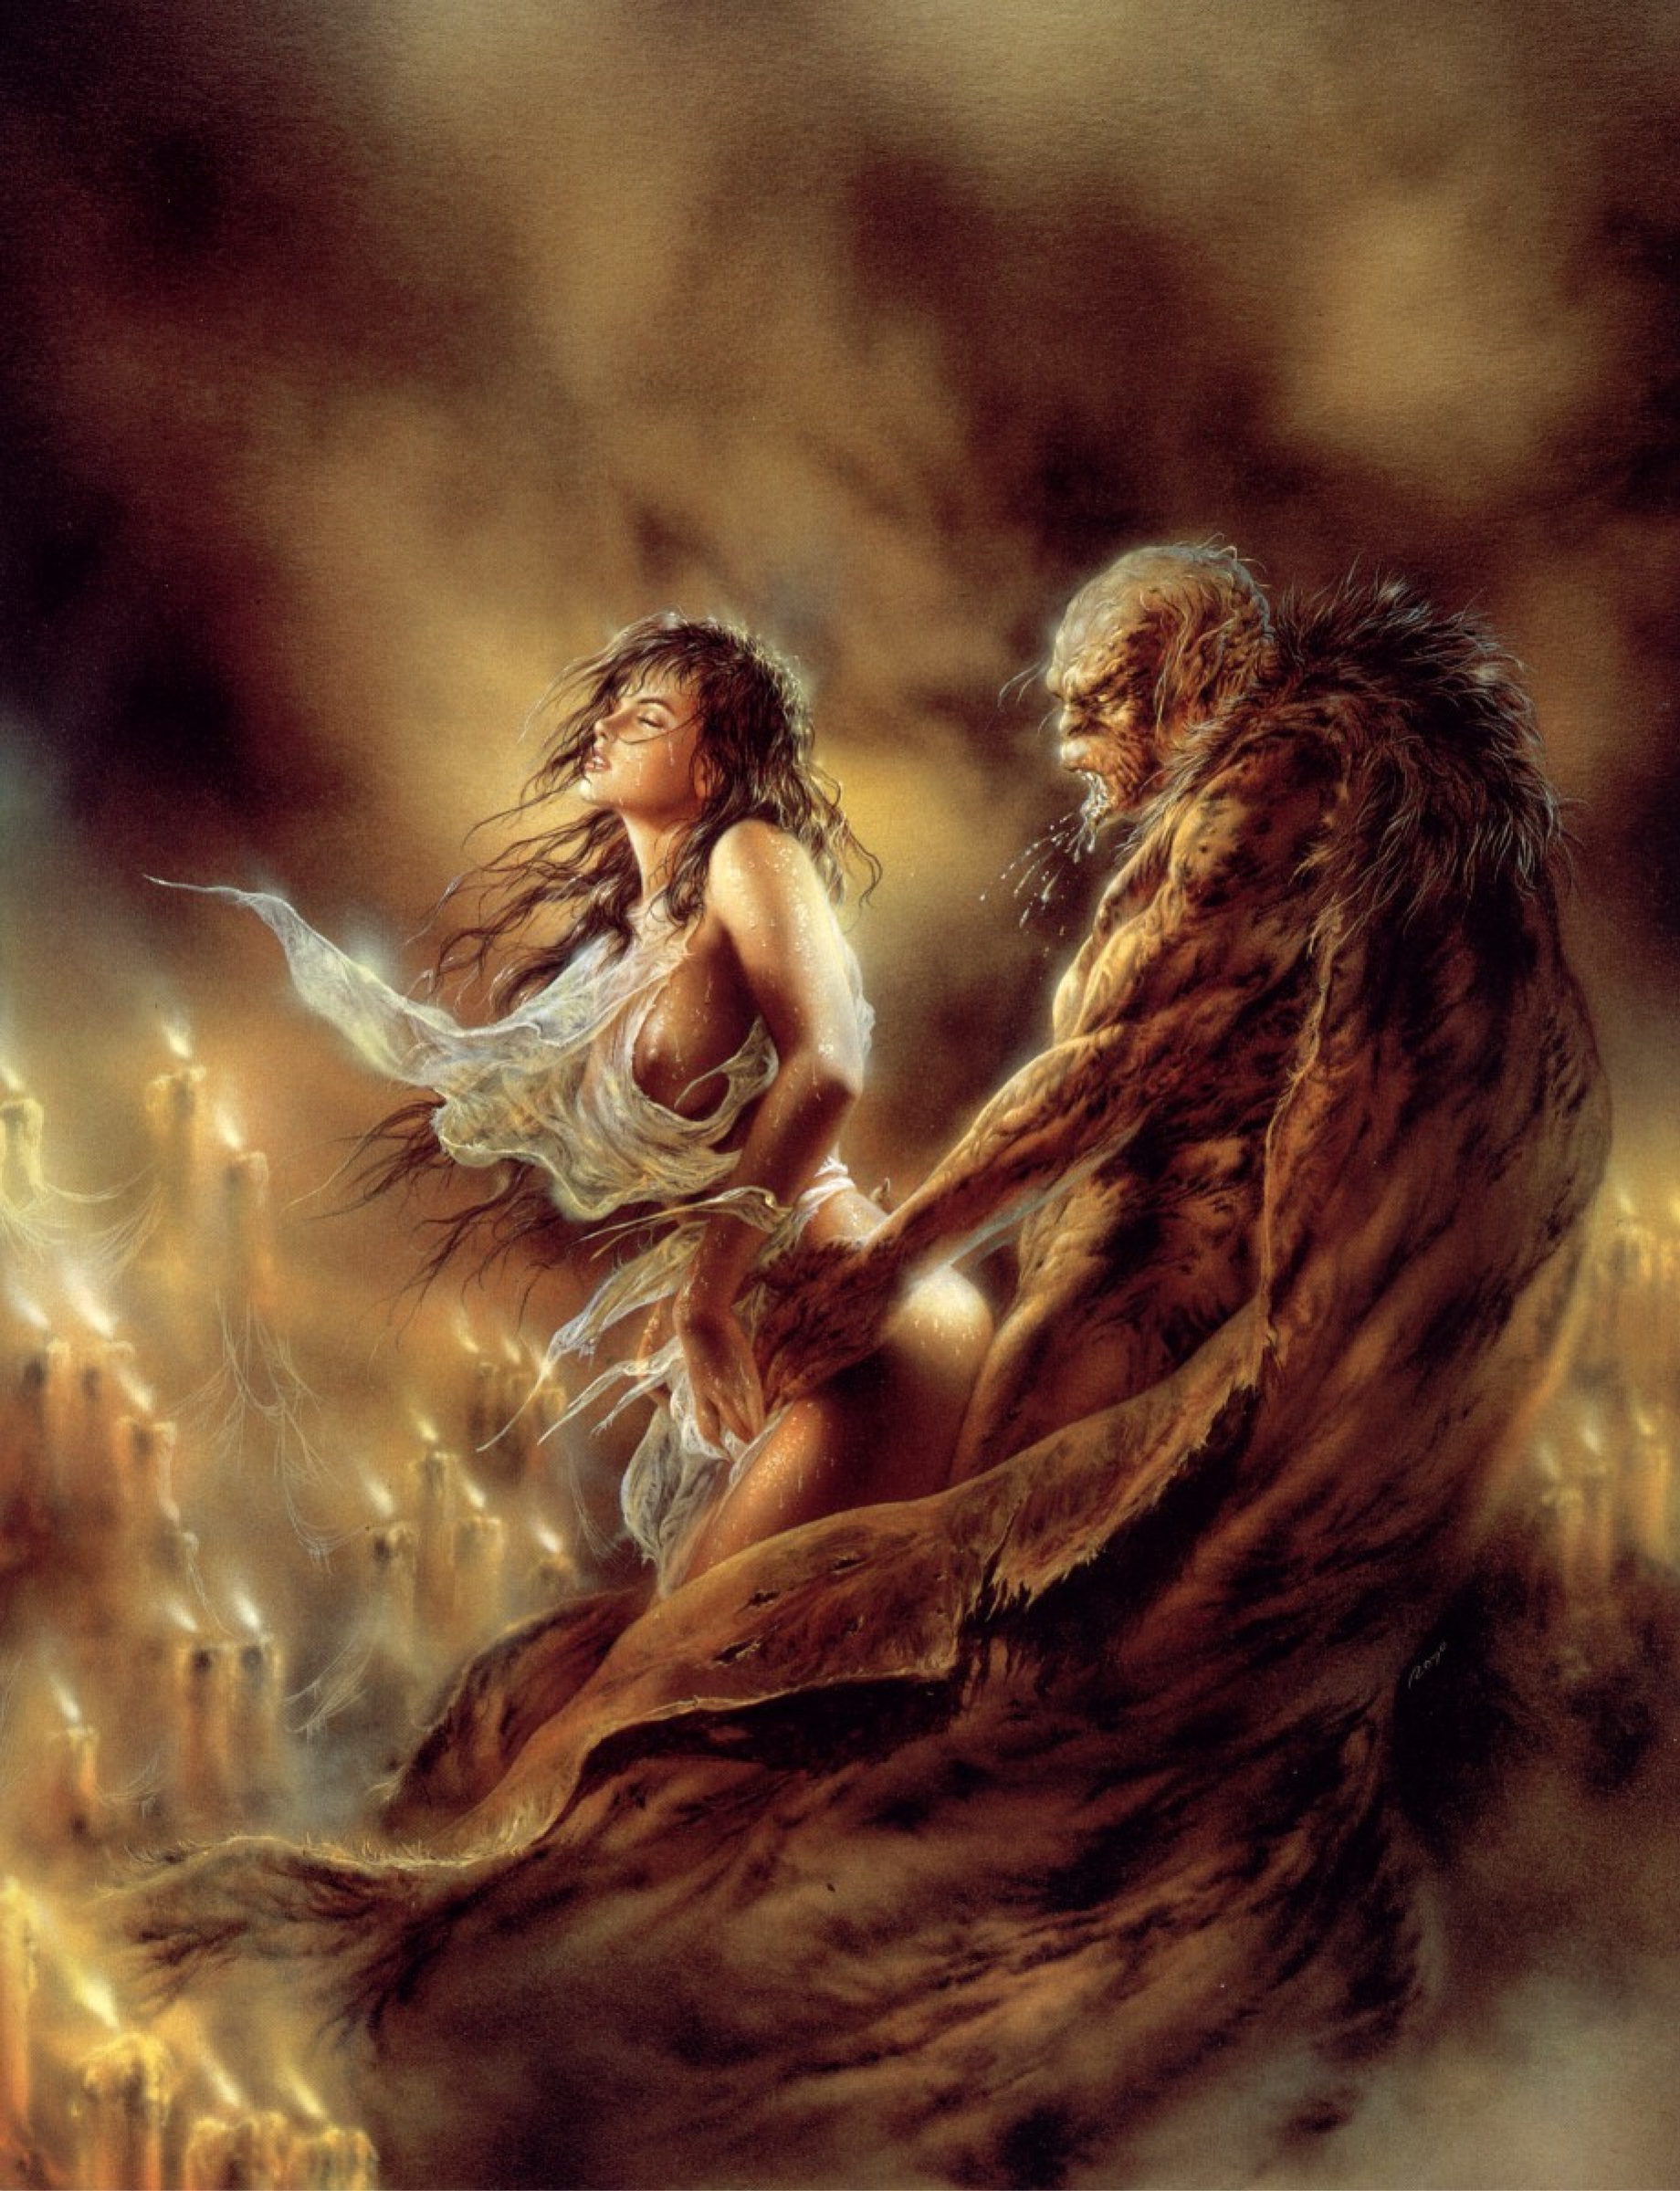 Secret sign by Luis Royo: History, Analysis & Facts